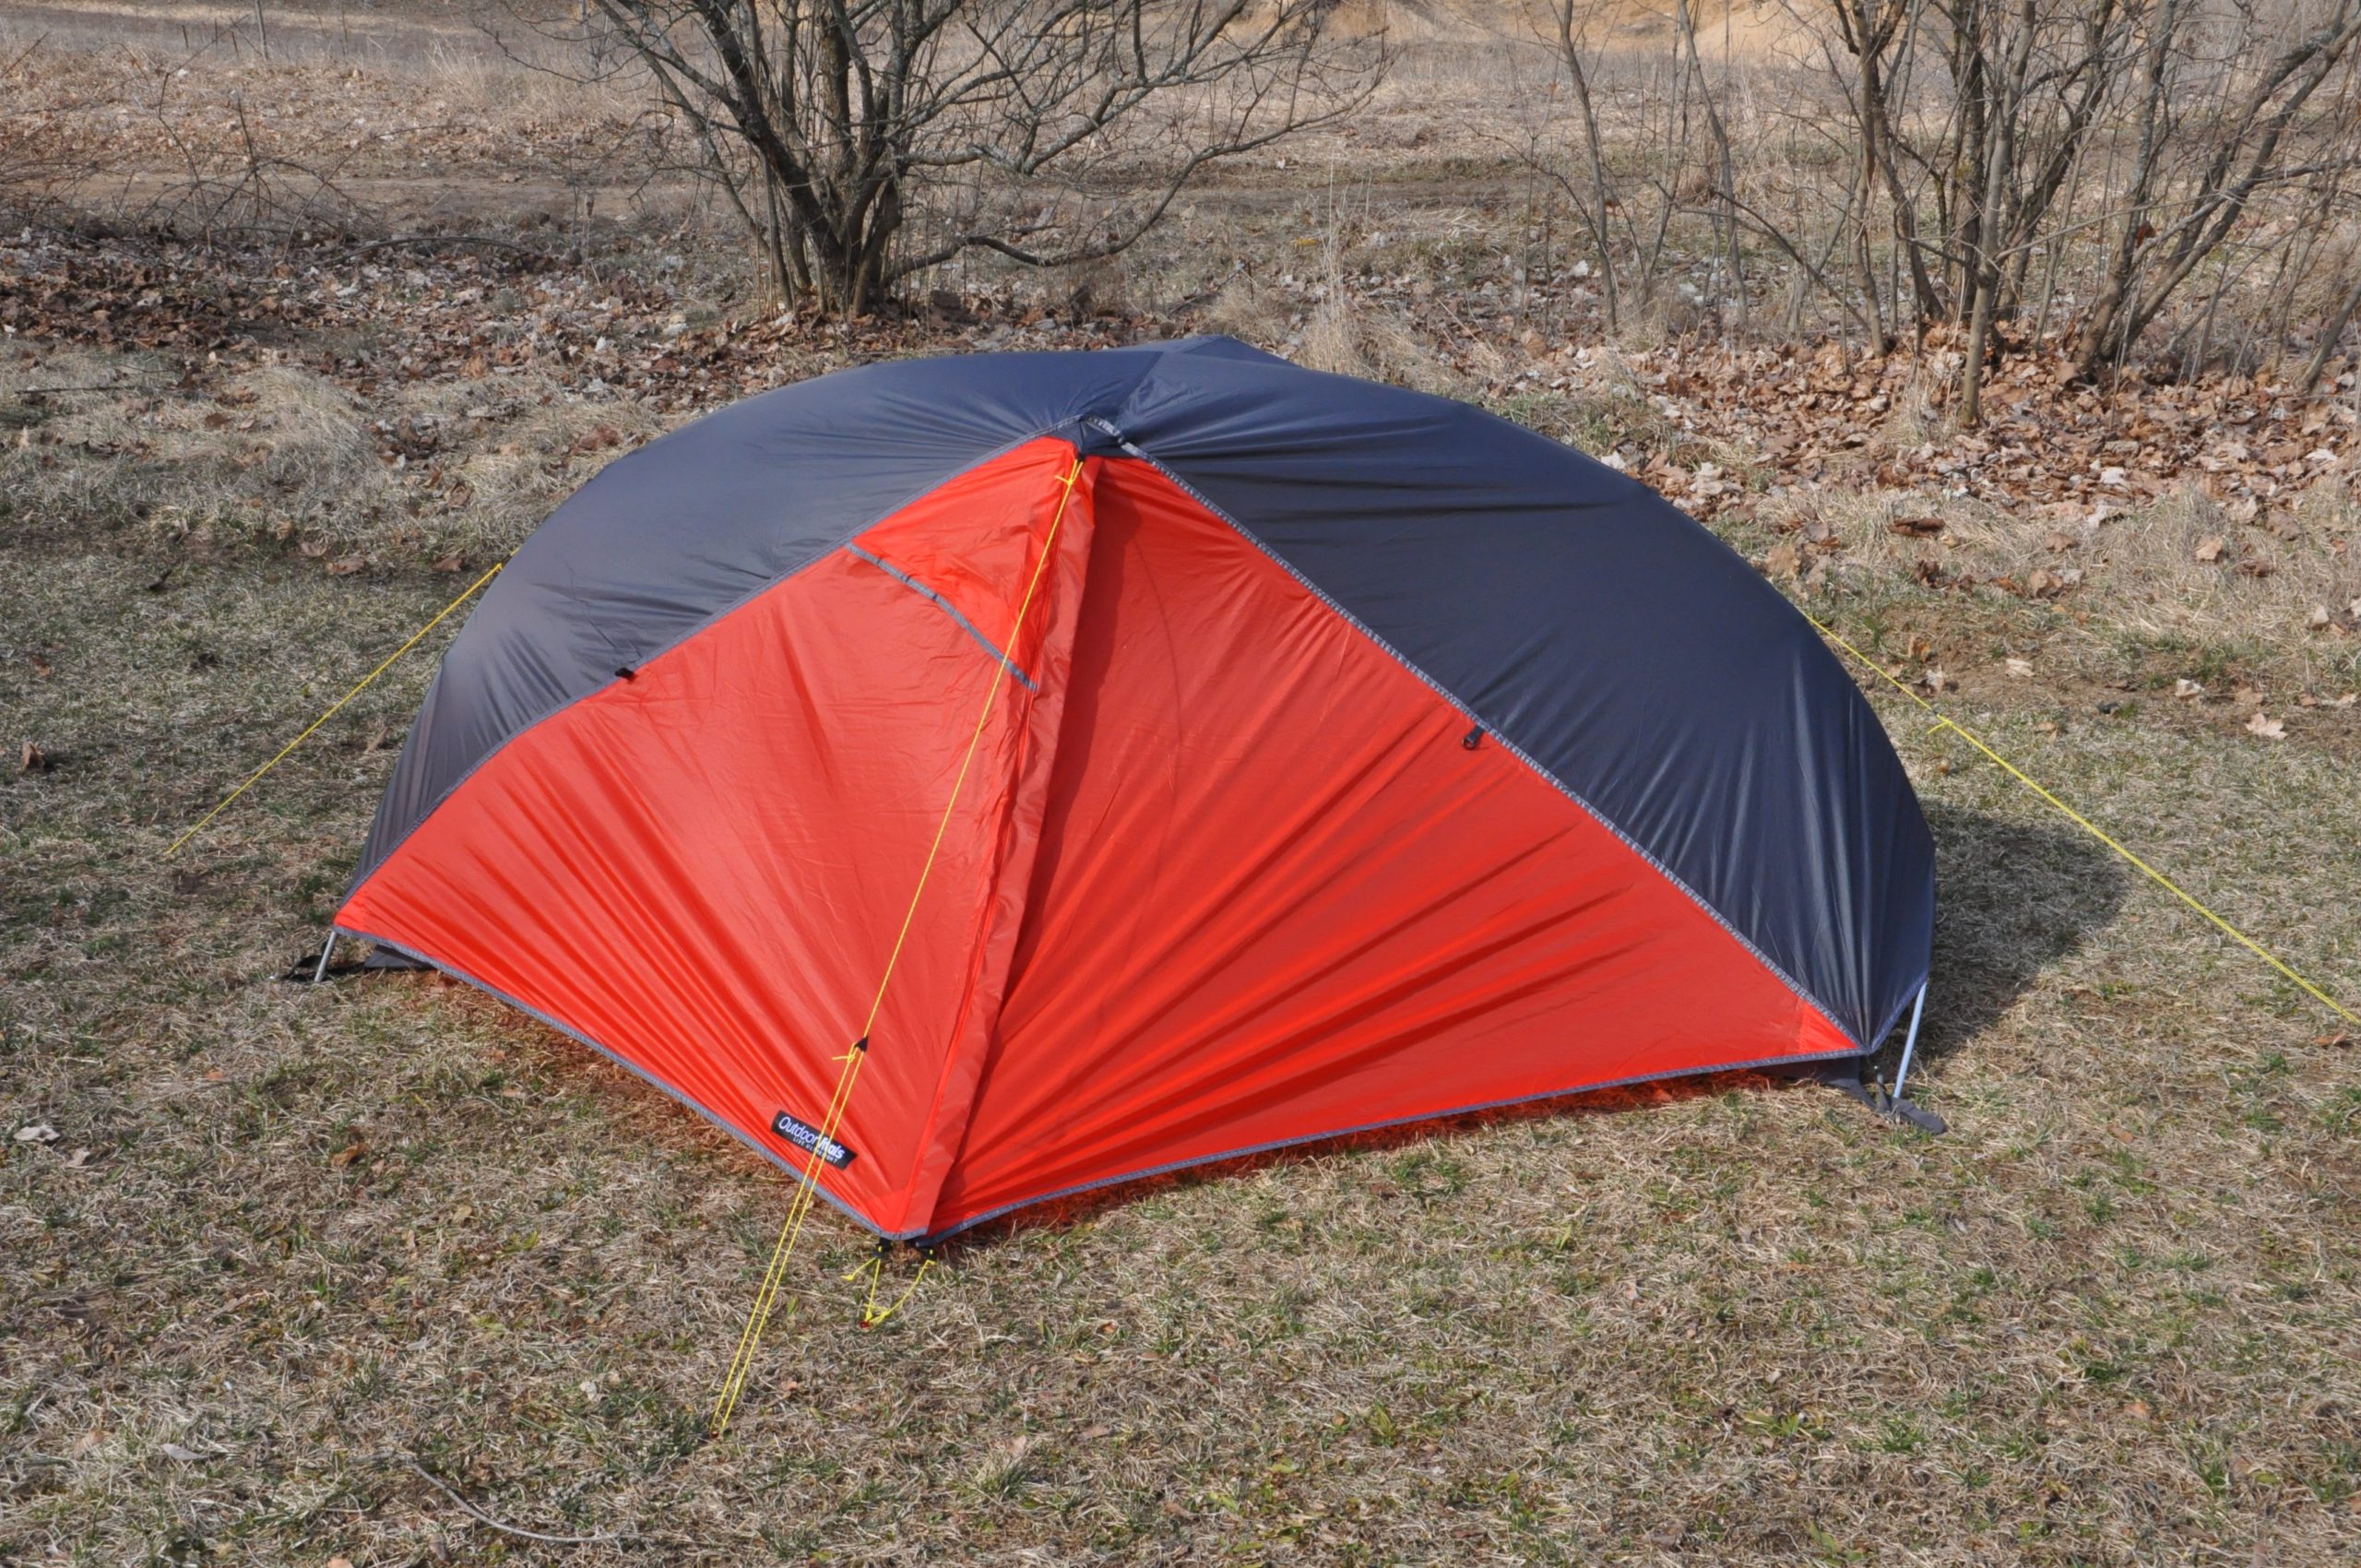 Tents for Backpacking